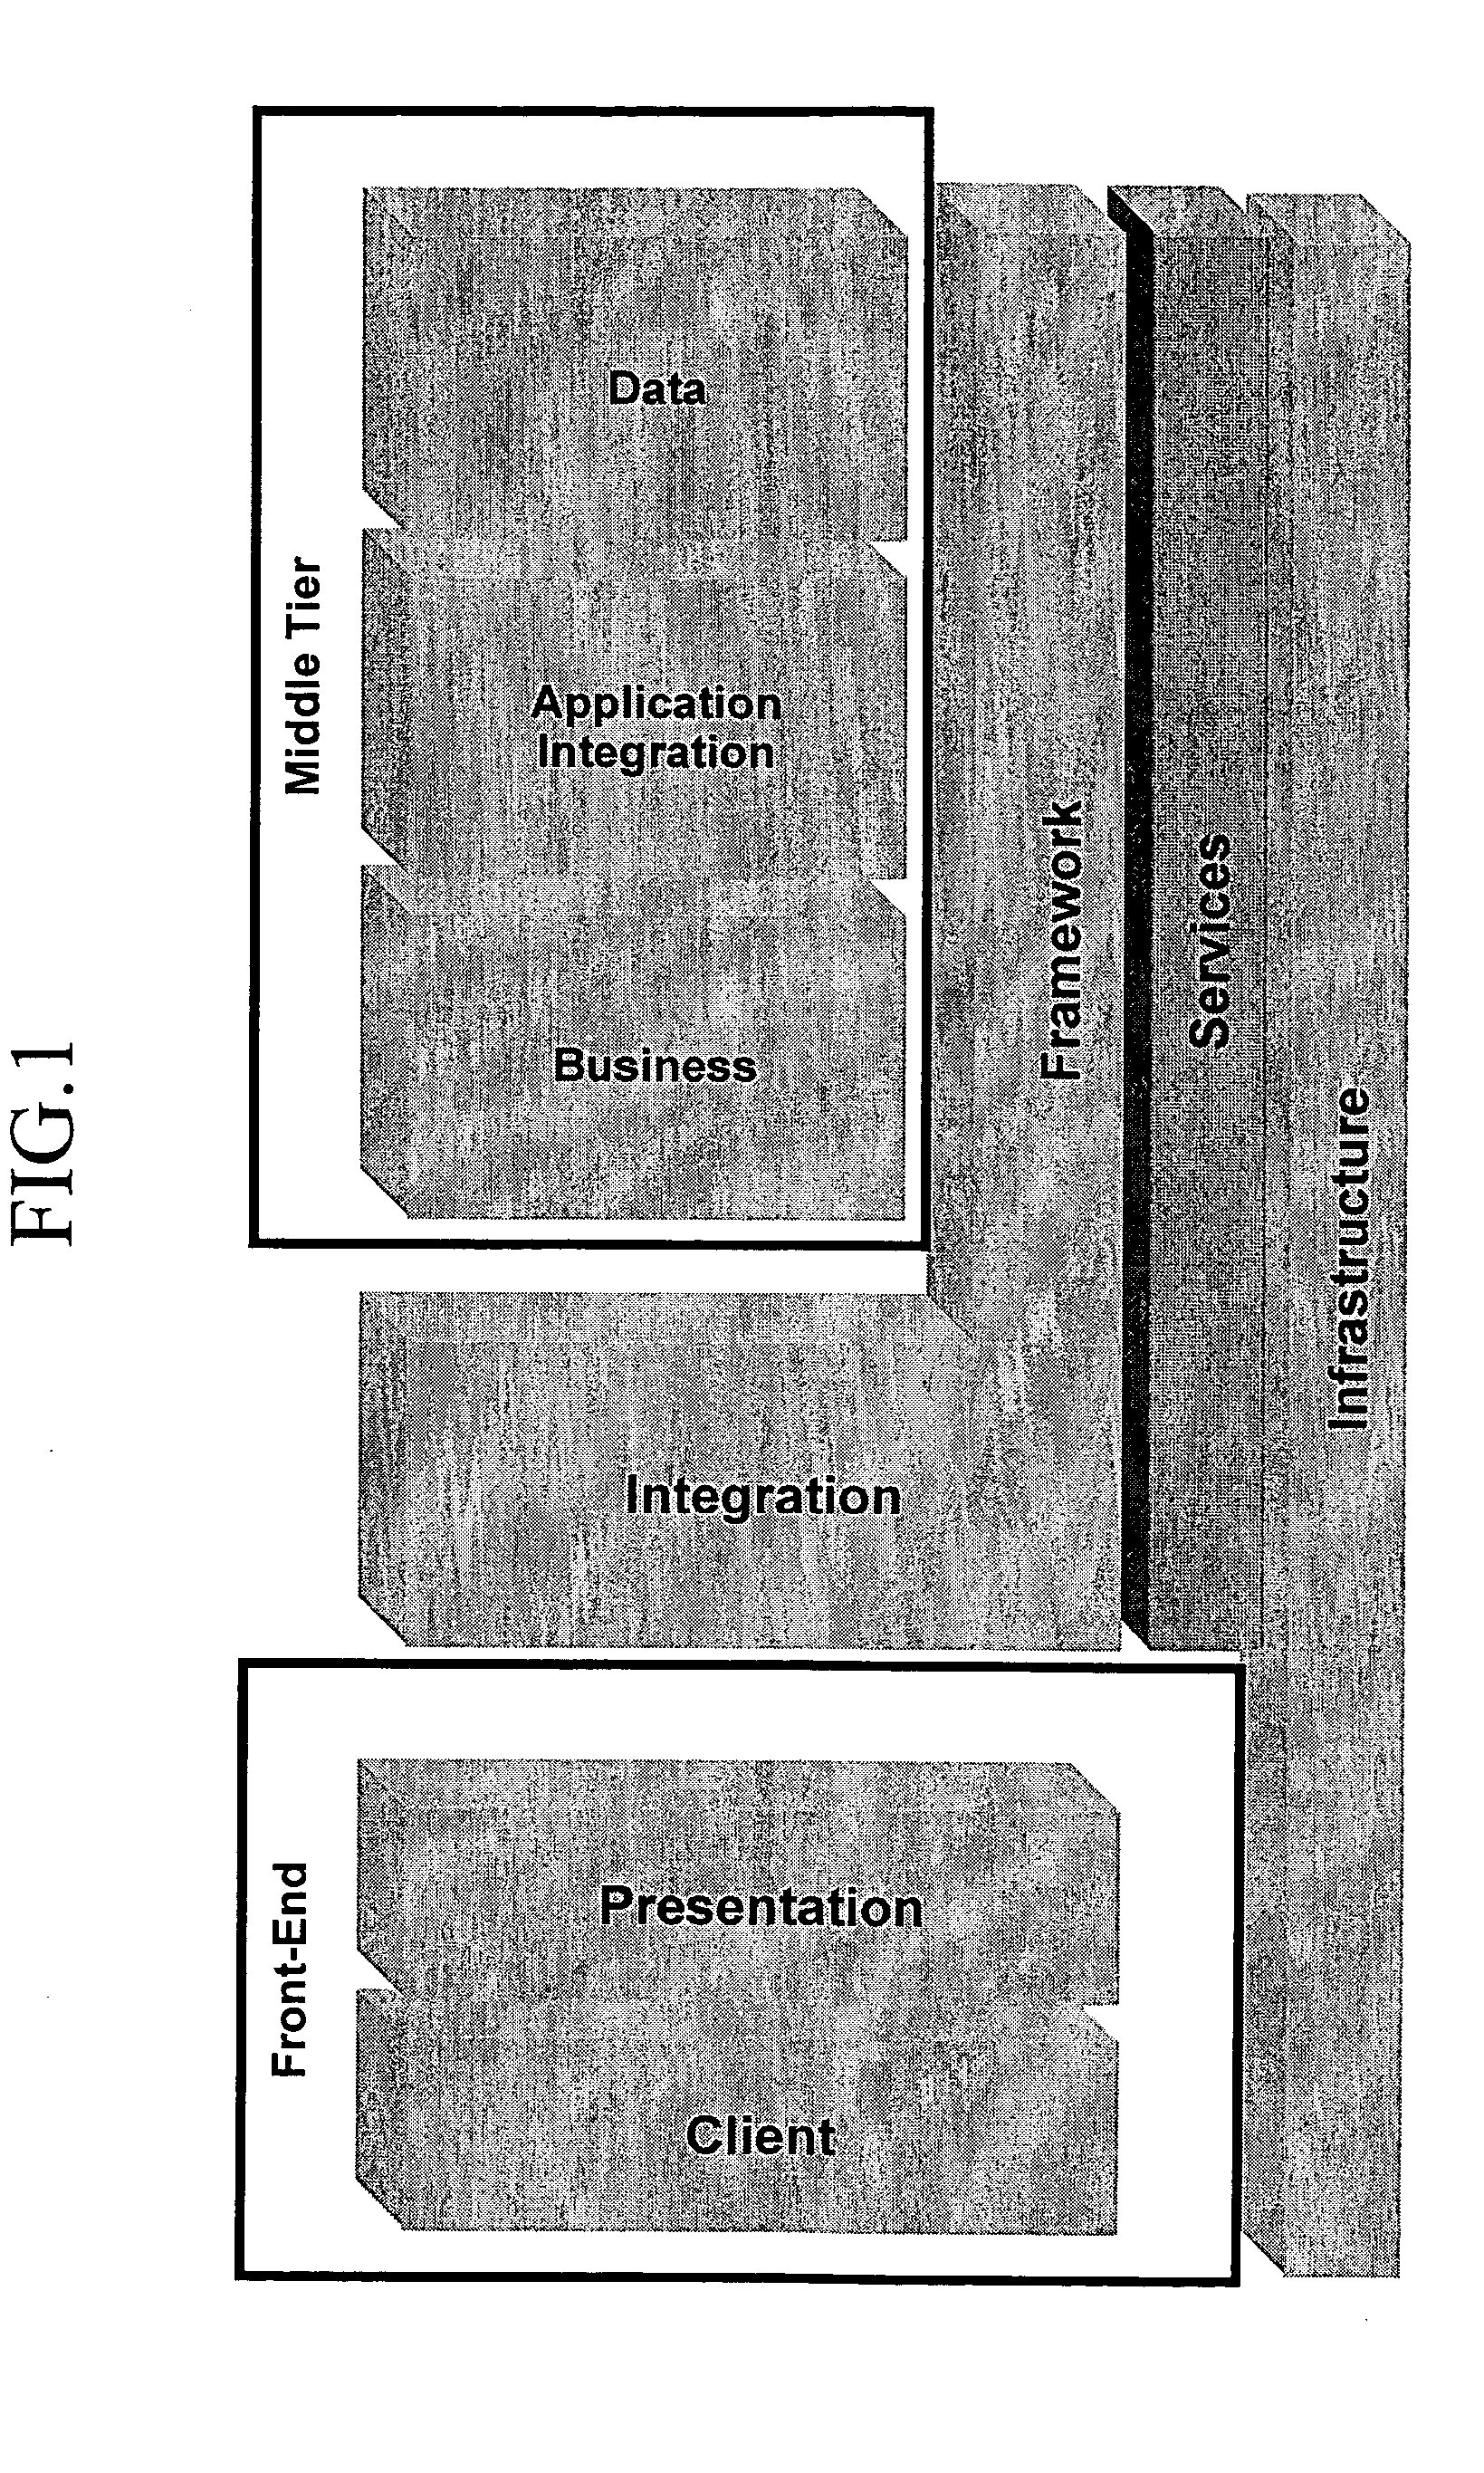 Methods, systems, and software for providing service integration framework